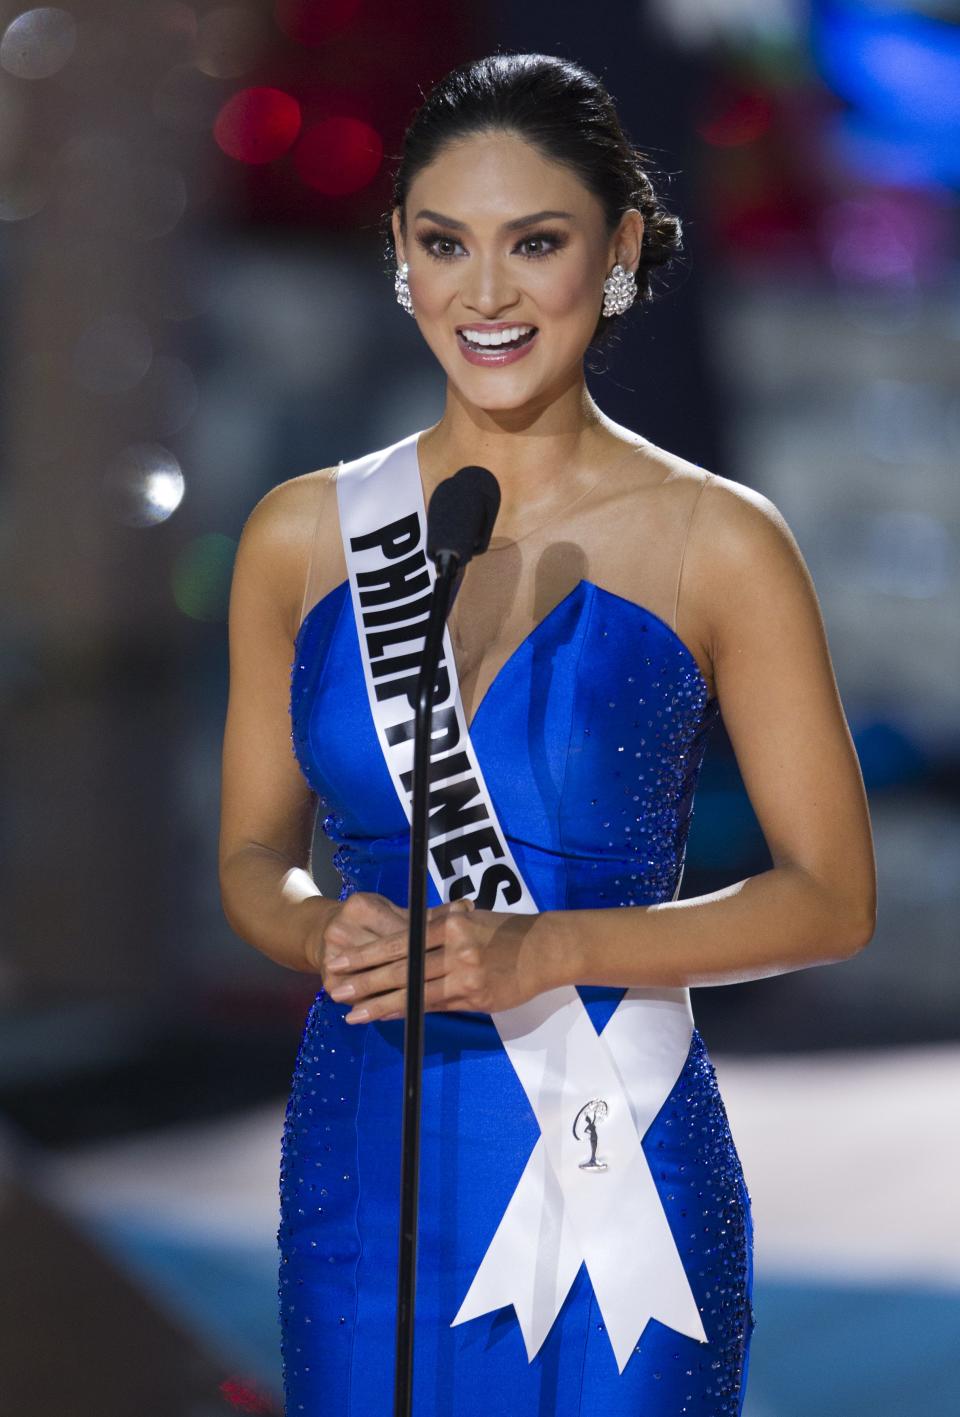 Miss Philippines Pia Alonzo Wurtzbach responds to a question during the 2015 Miss Universe Pageant in Las Vegas